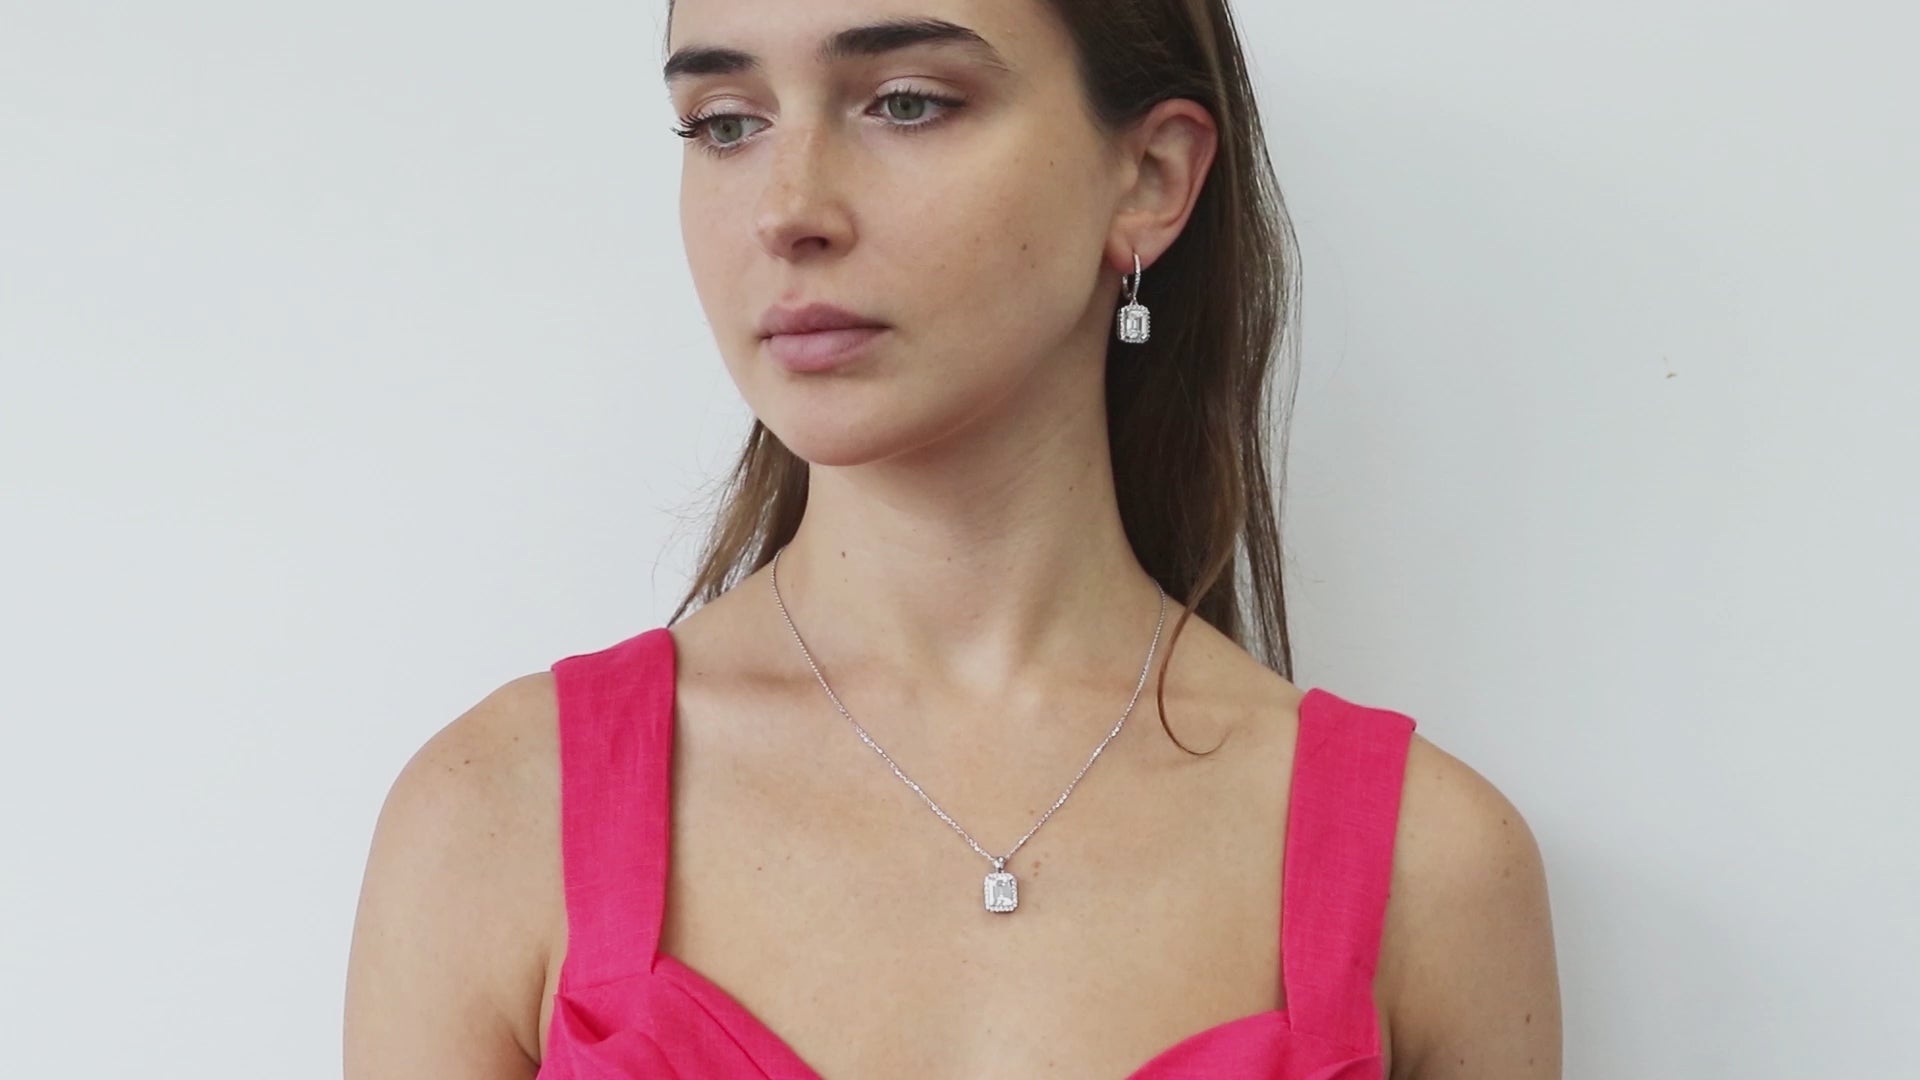 Video Contains Halo Emerald Cut CZ Pendant Necklace in Sterling Silver. Style Number N1269-01